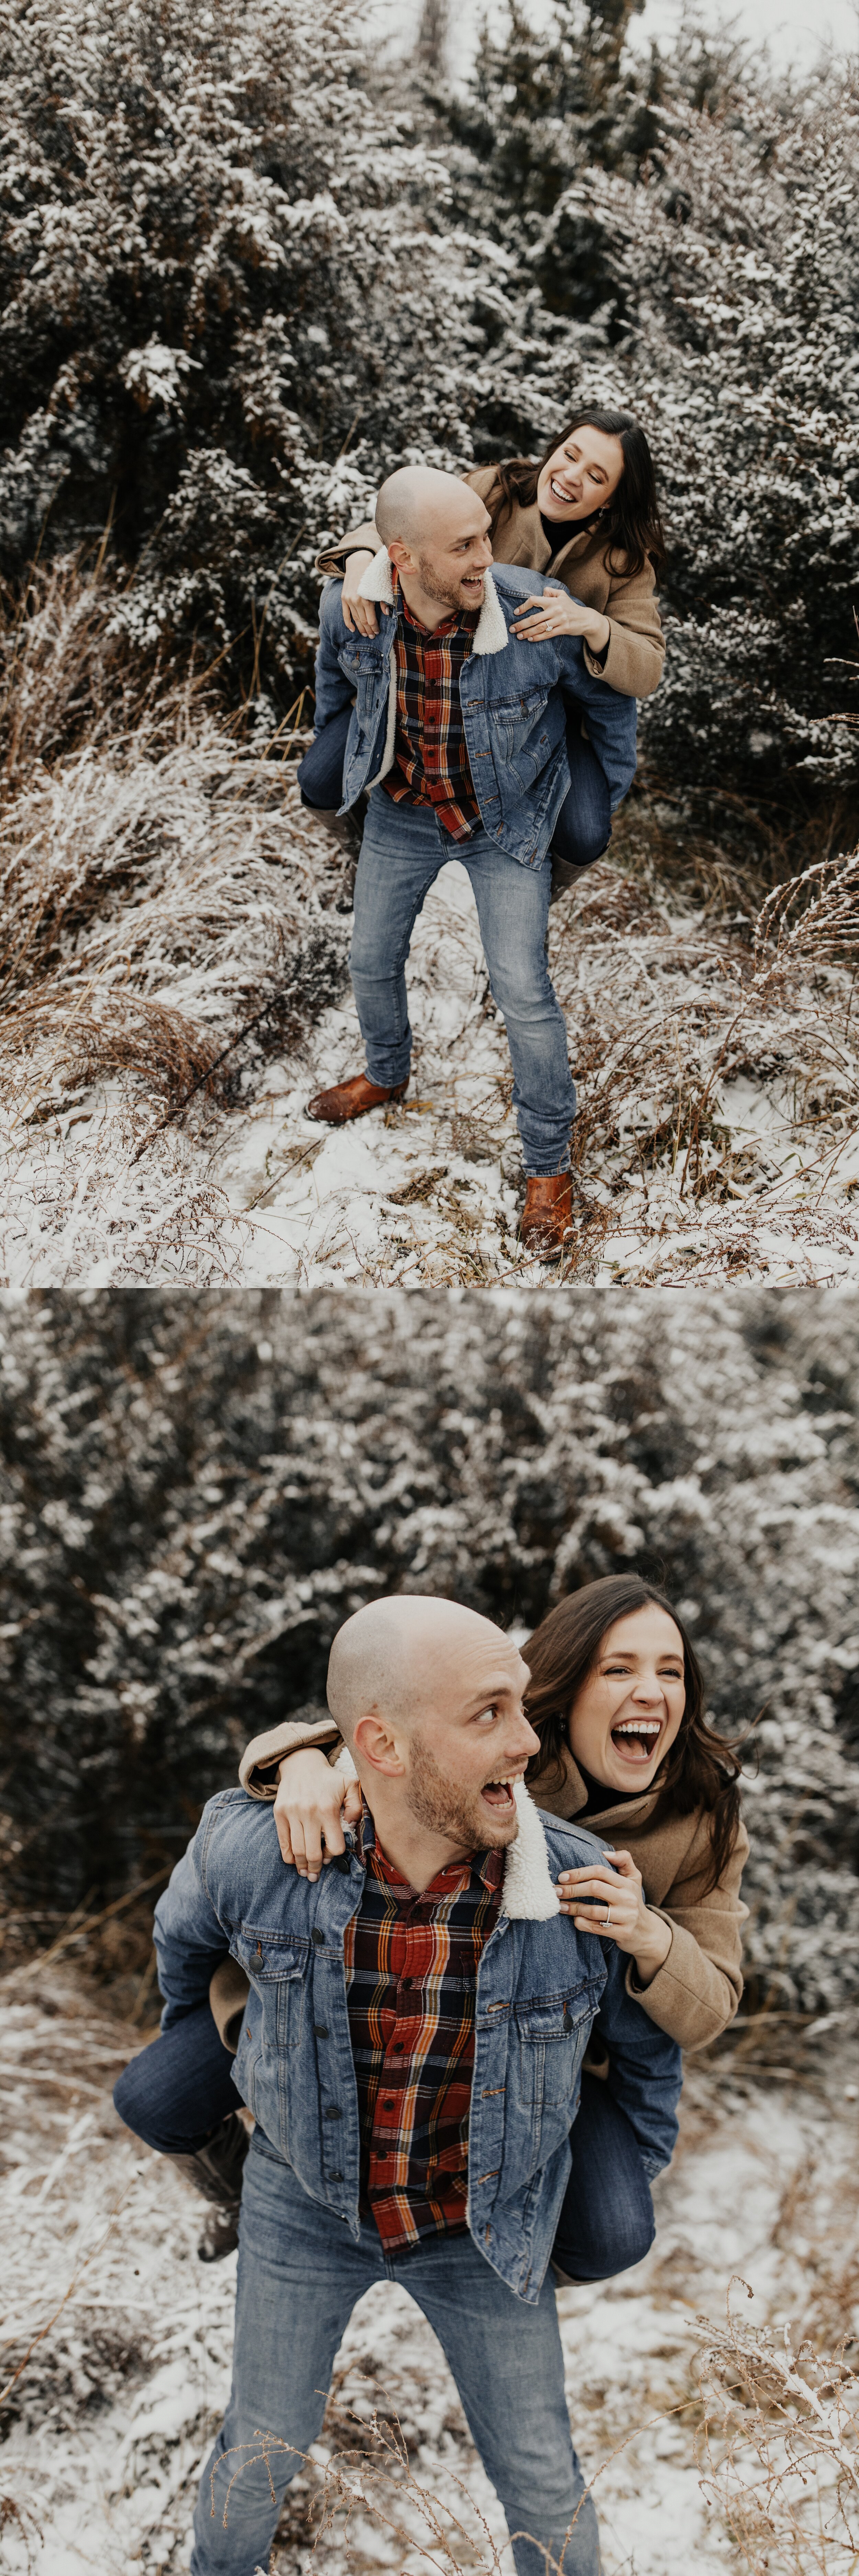 jessika-christine-photography-outdoor-engagement-couples-snow-adventurous-session (12).jpg